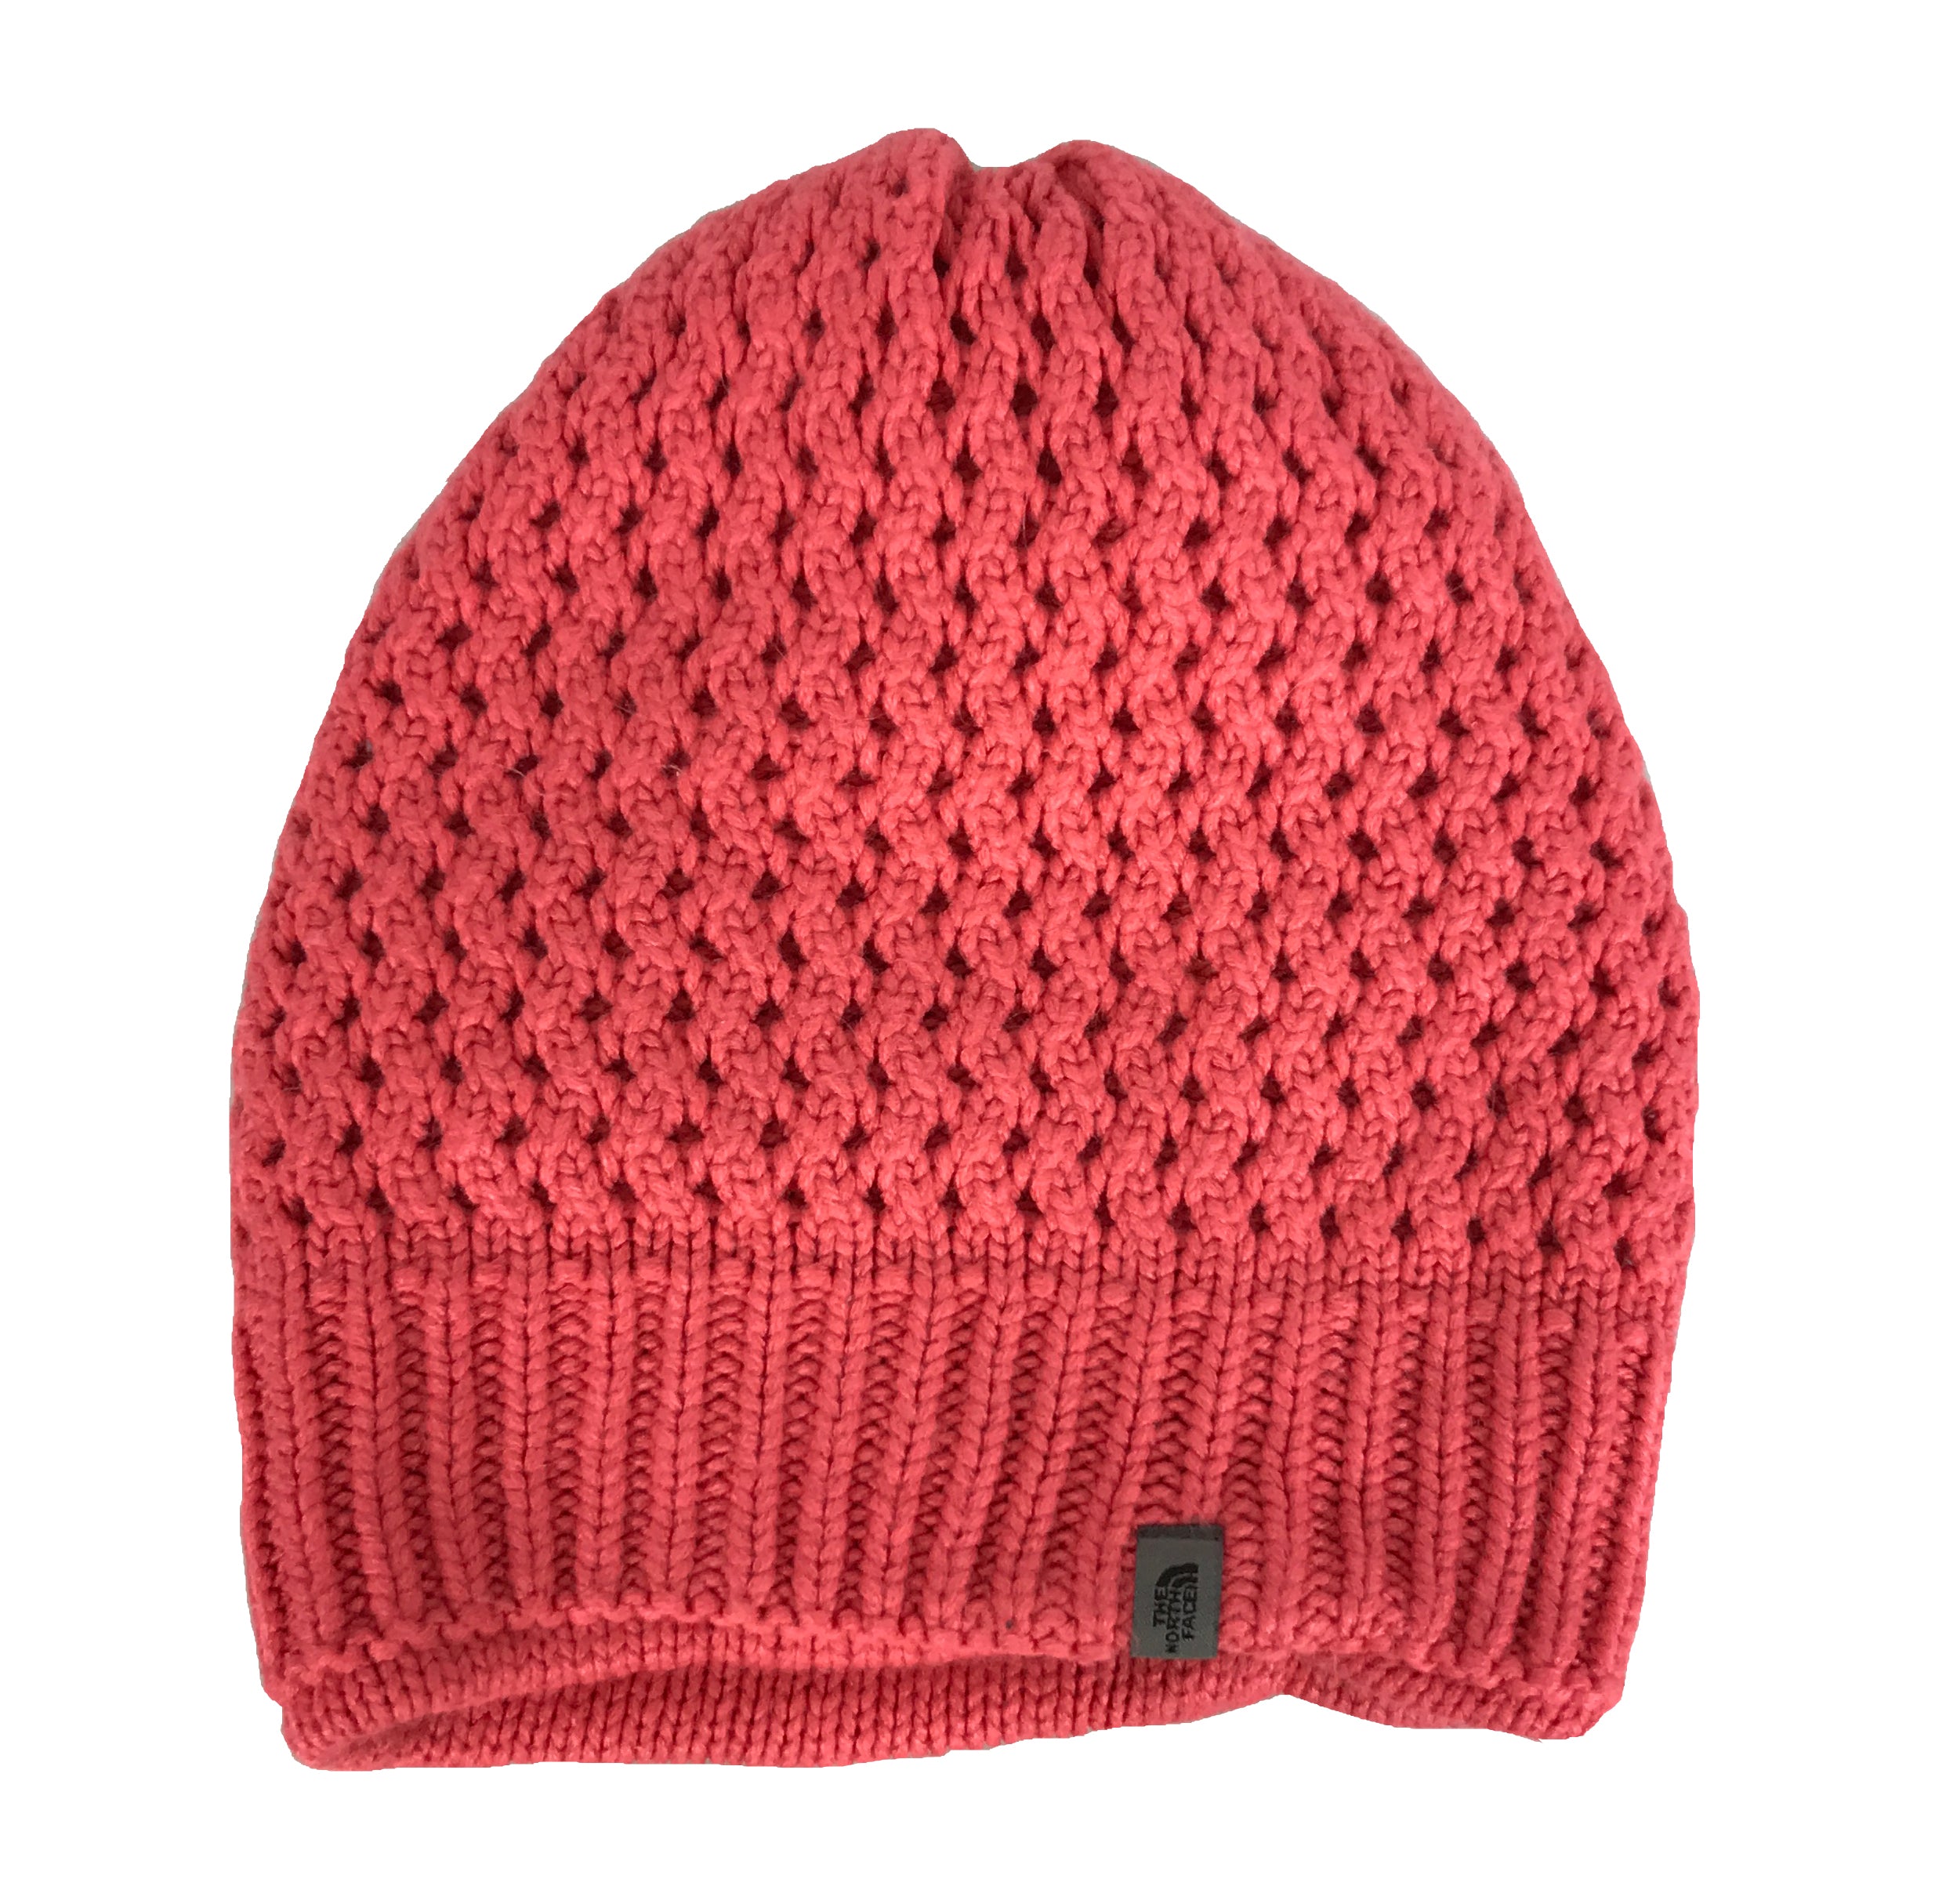 The North Face Pink Knit Beanie Hat